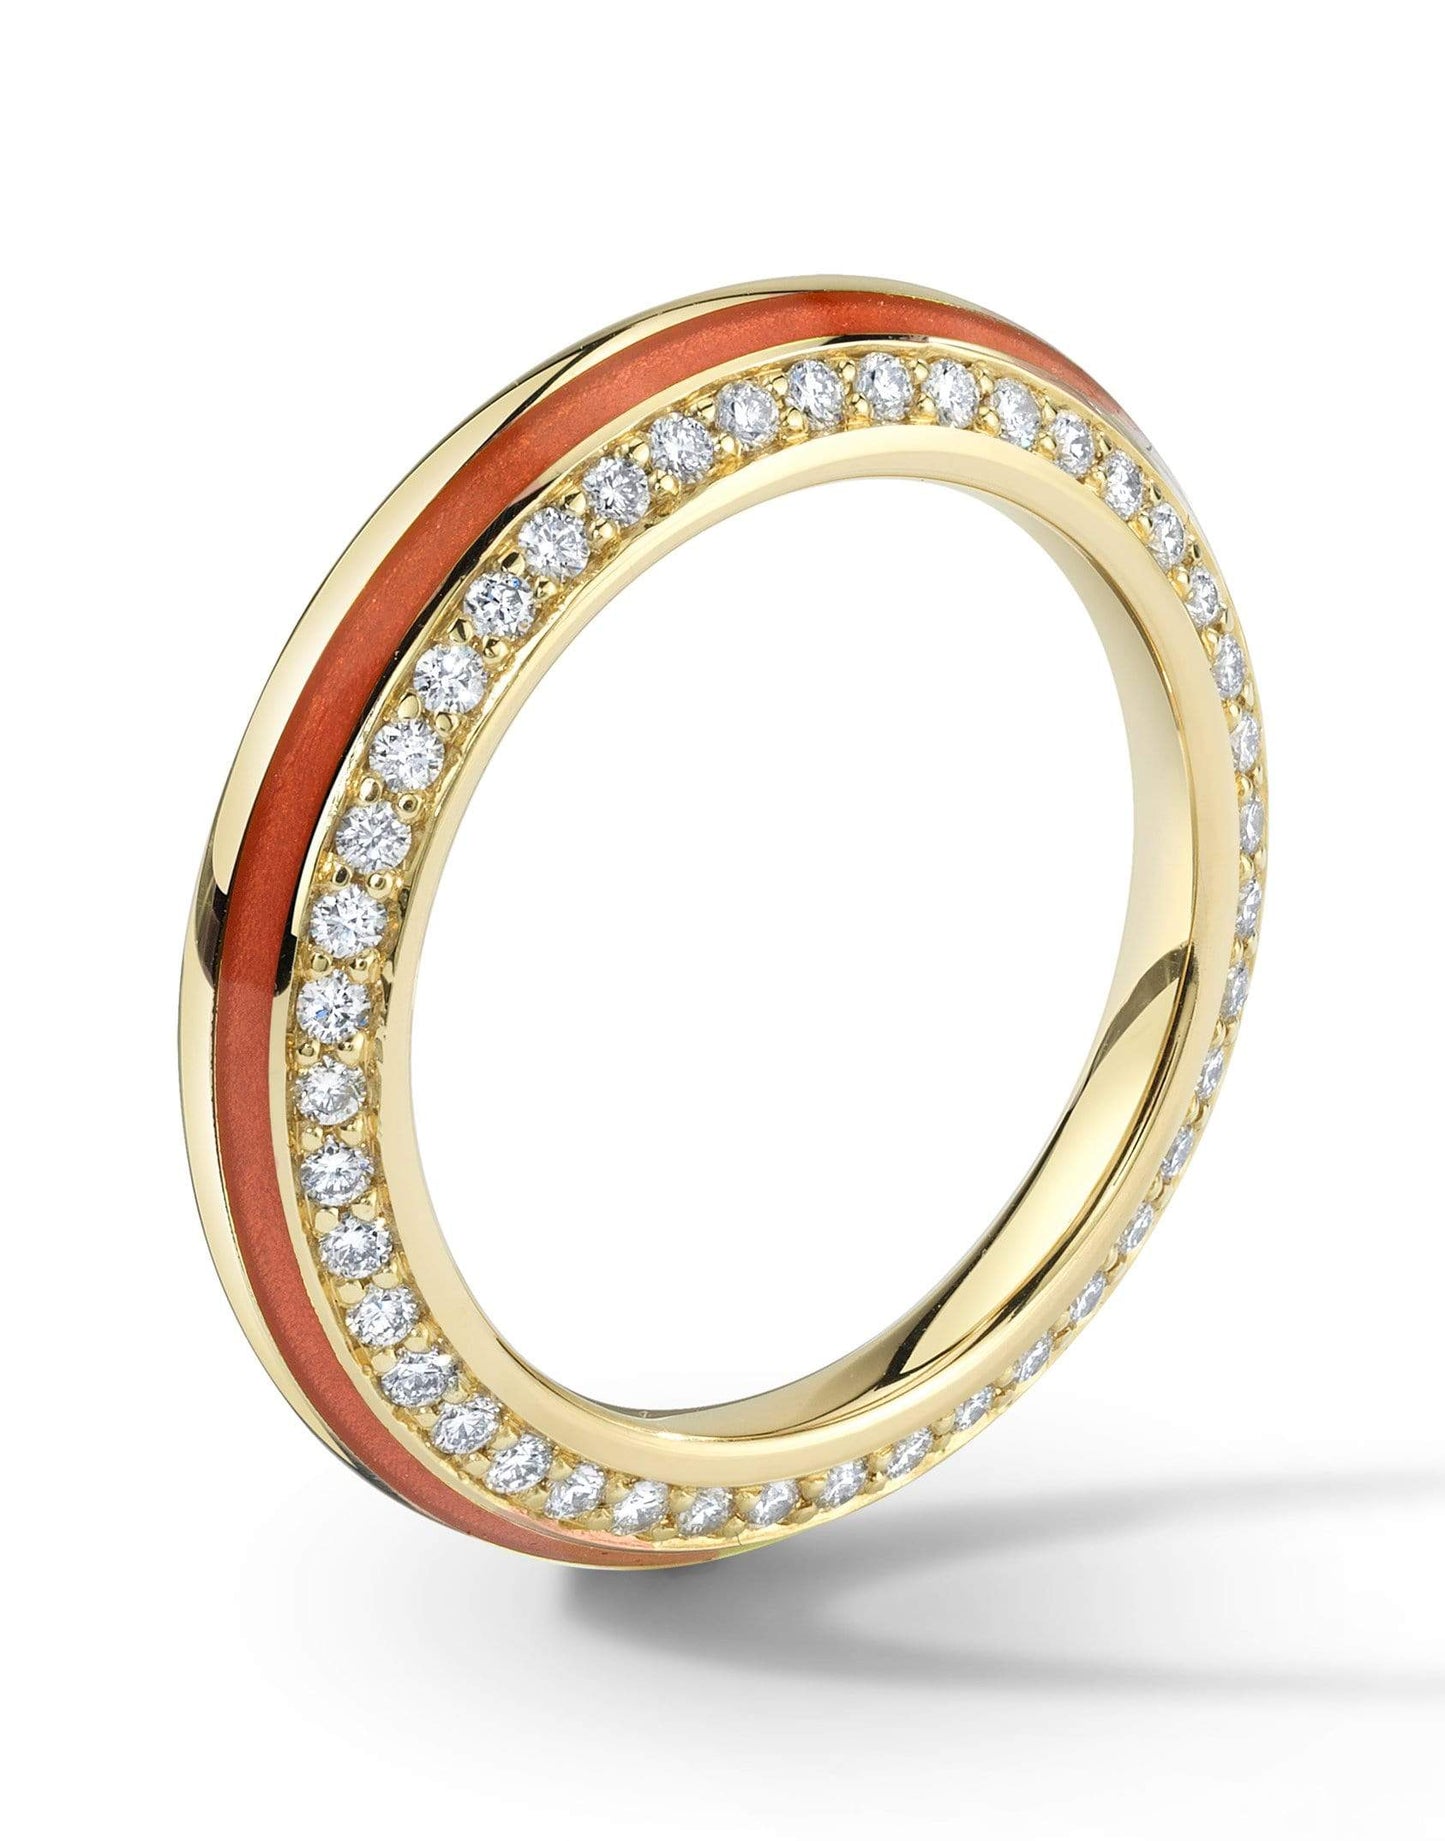 ANDY LIF-Red Enamel and Diamond Ring-YELLOW GOLD